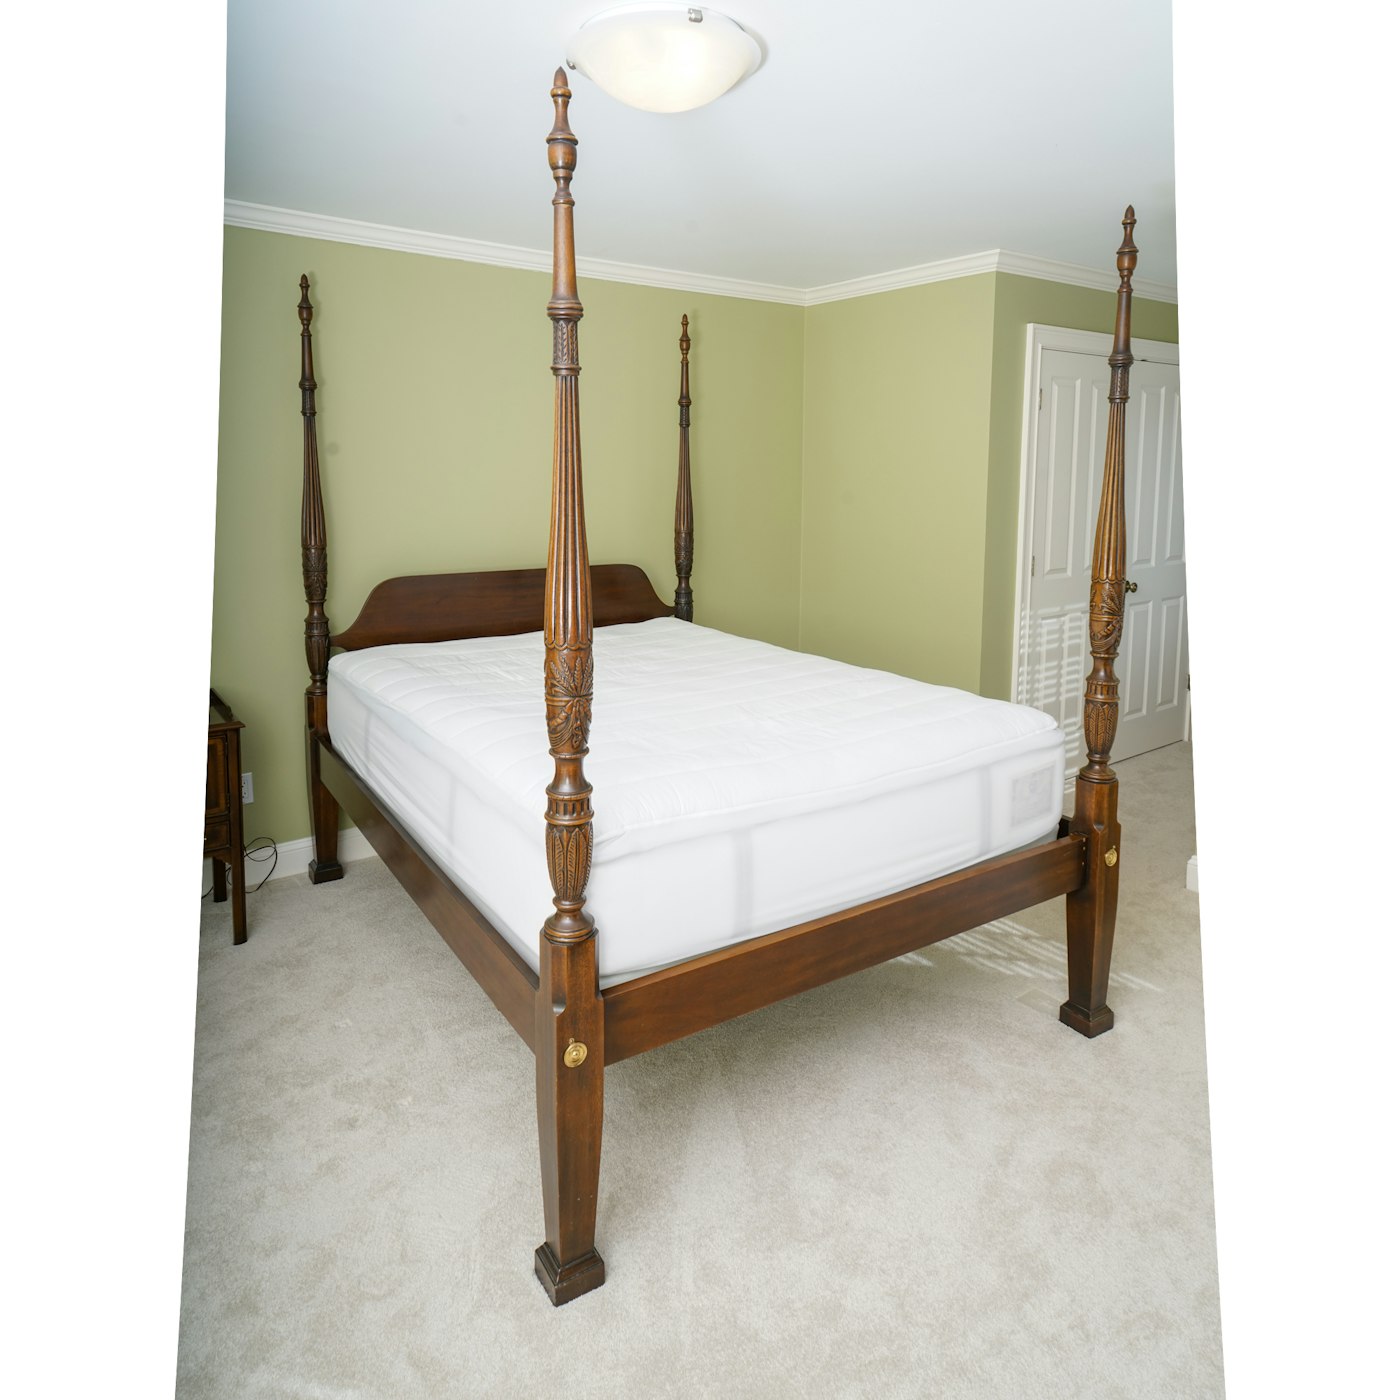 Queen Sized Four Poster Bed Frame by Drexel | EBTH